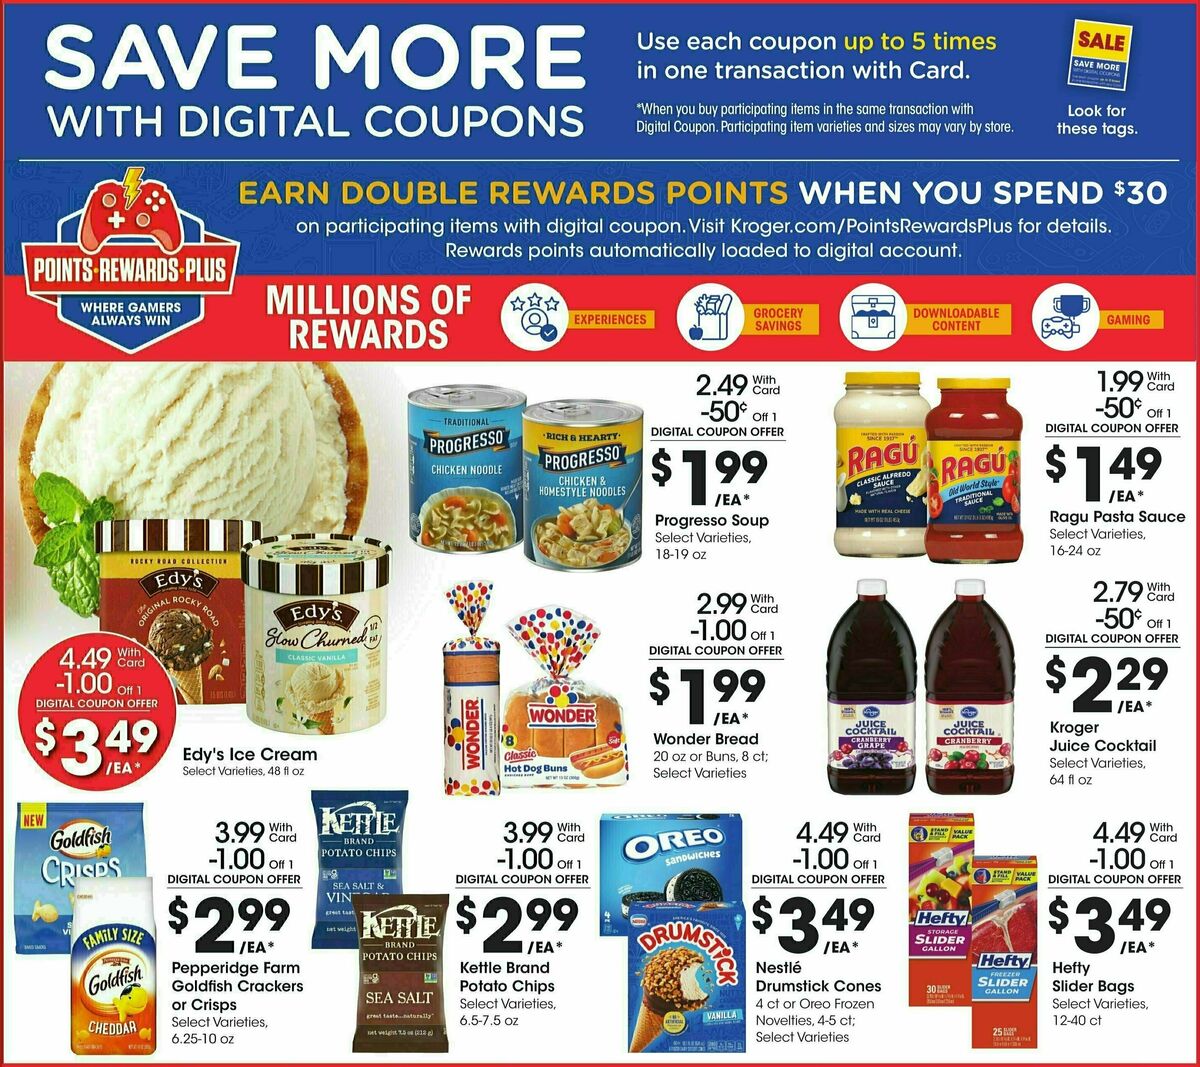 Kroger Weekly Ad from March 27